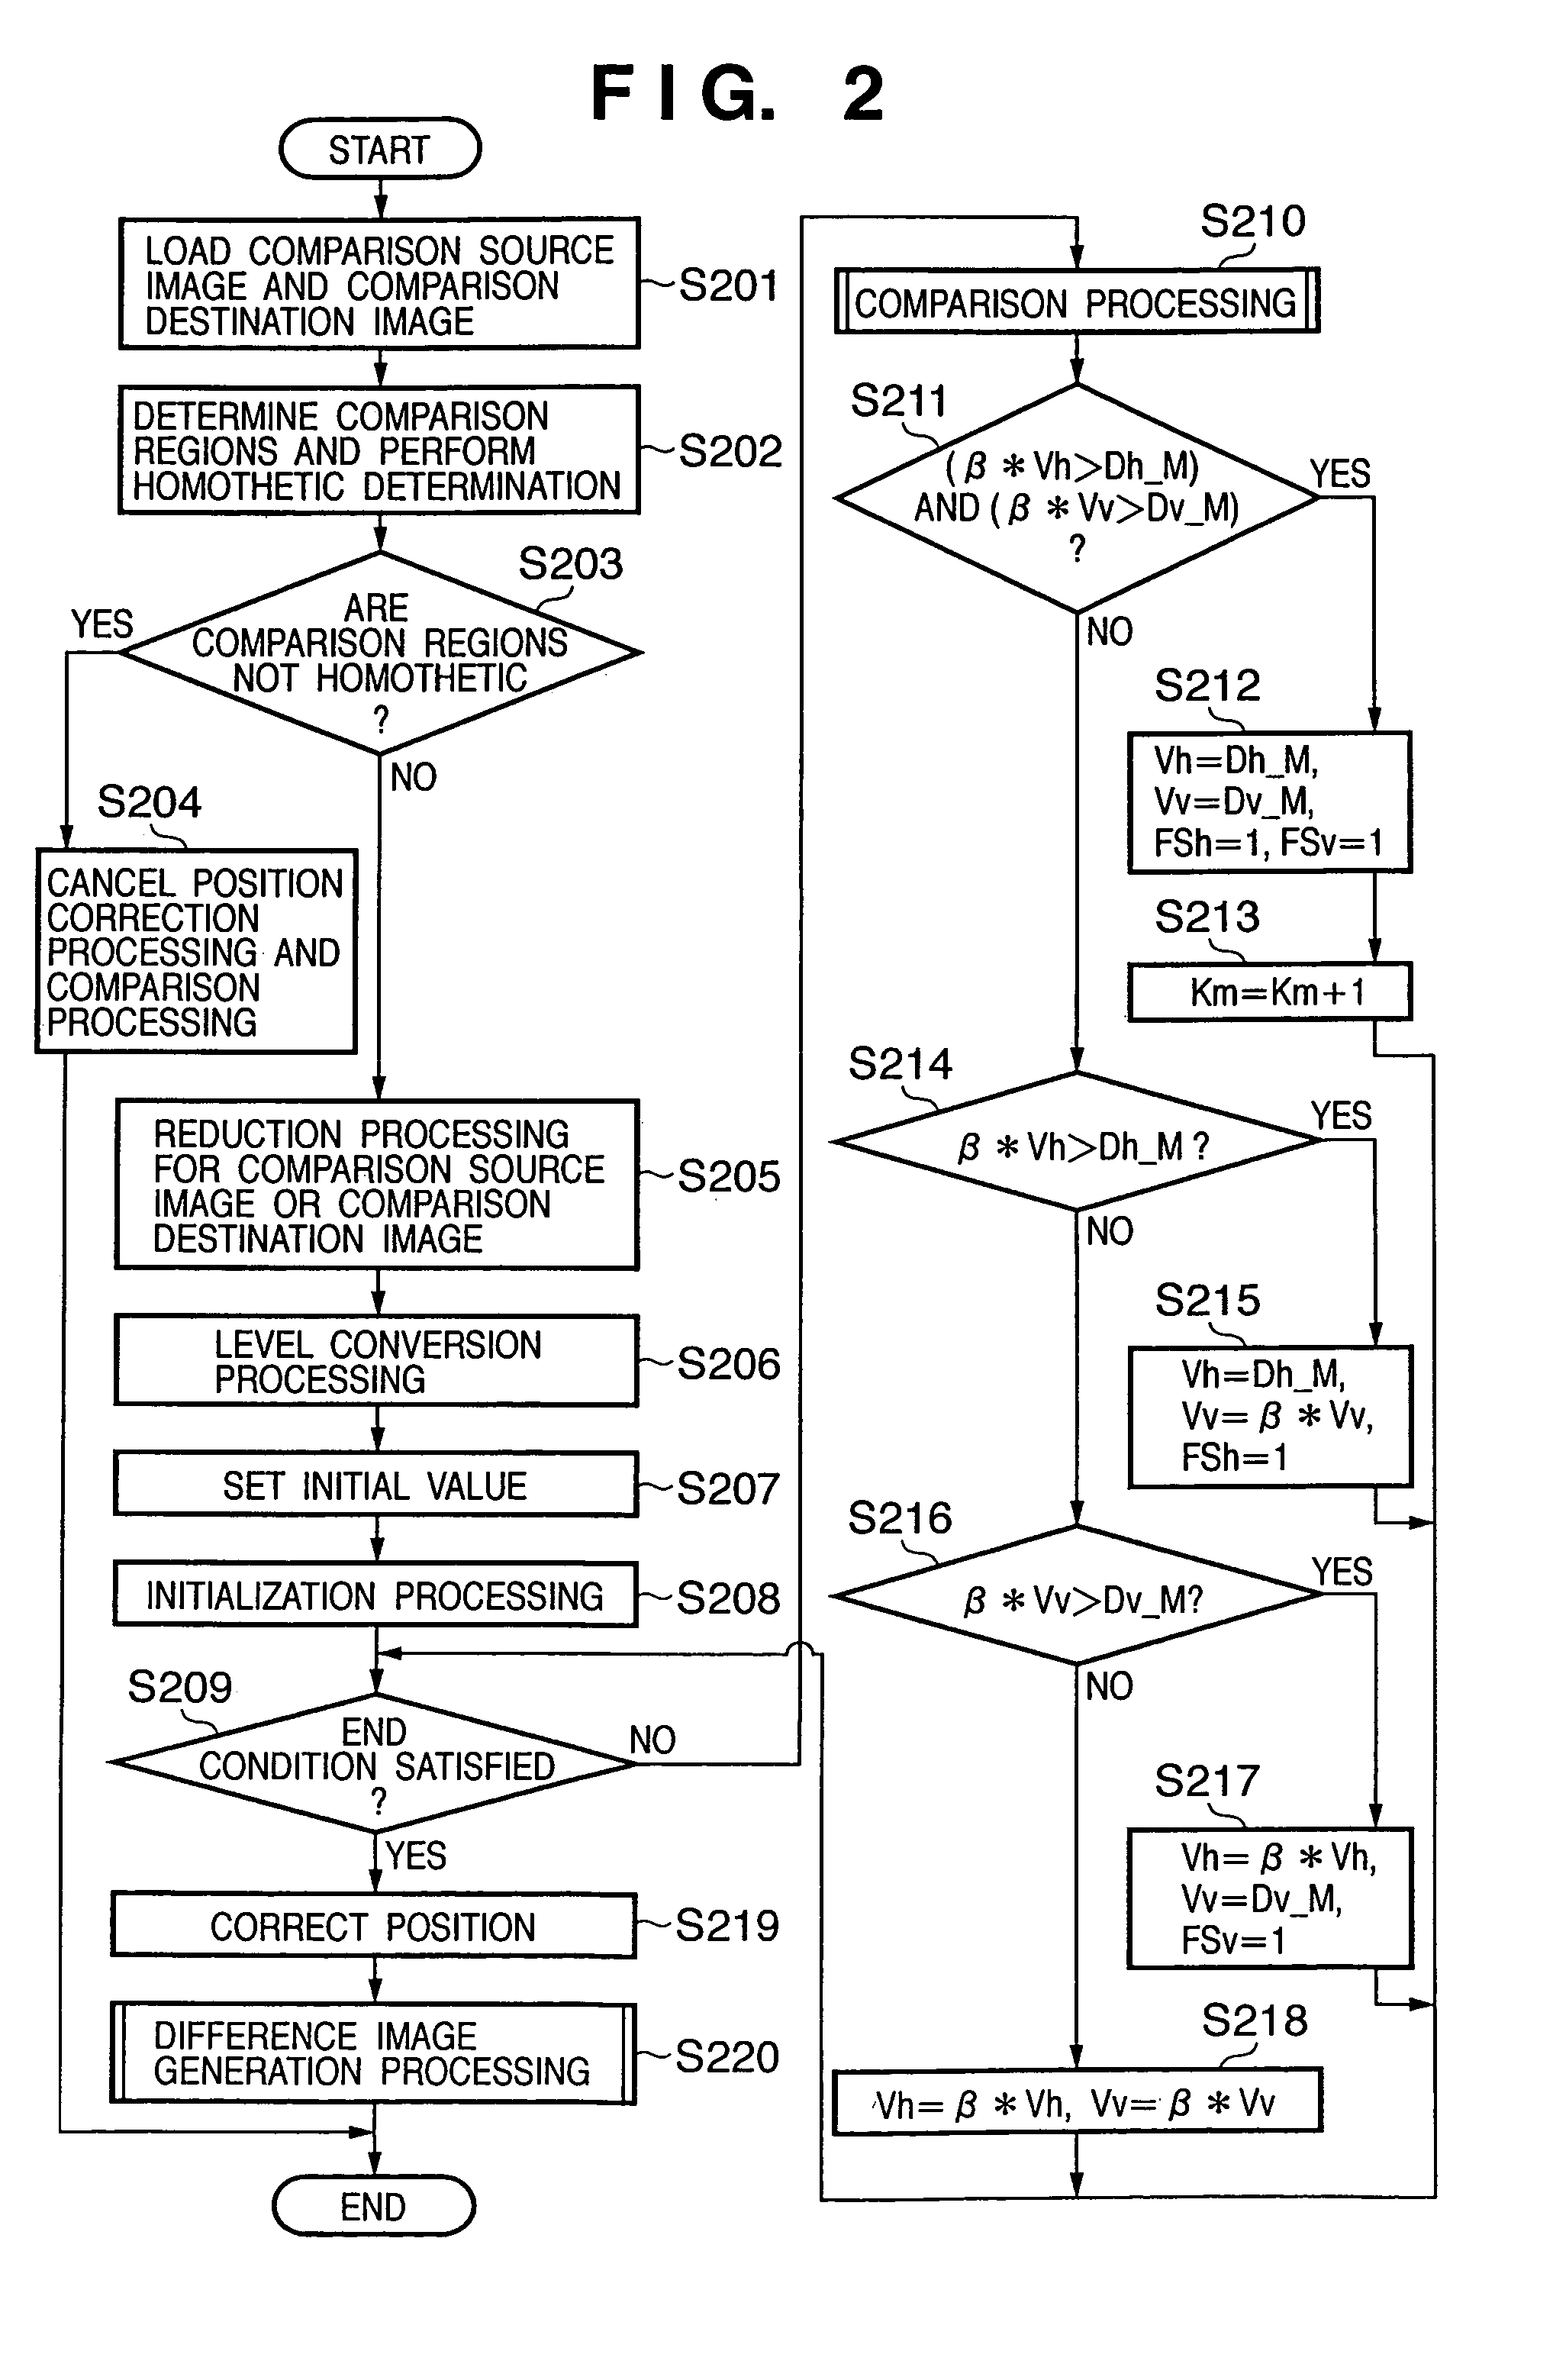 Image processing apparatus, control method therefor, and program